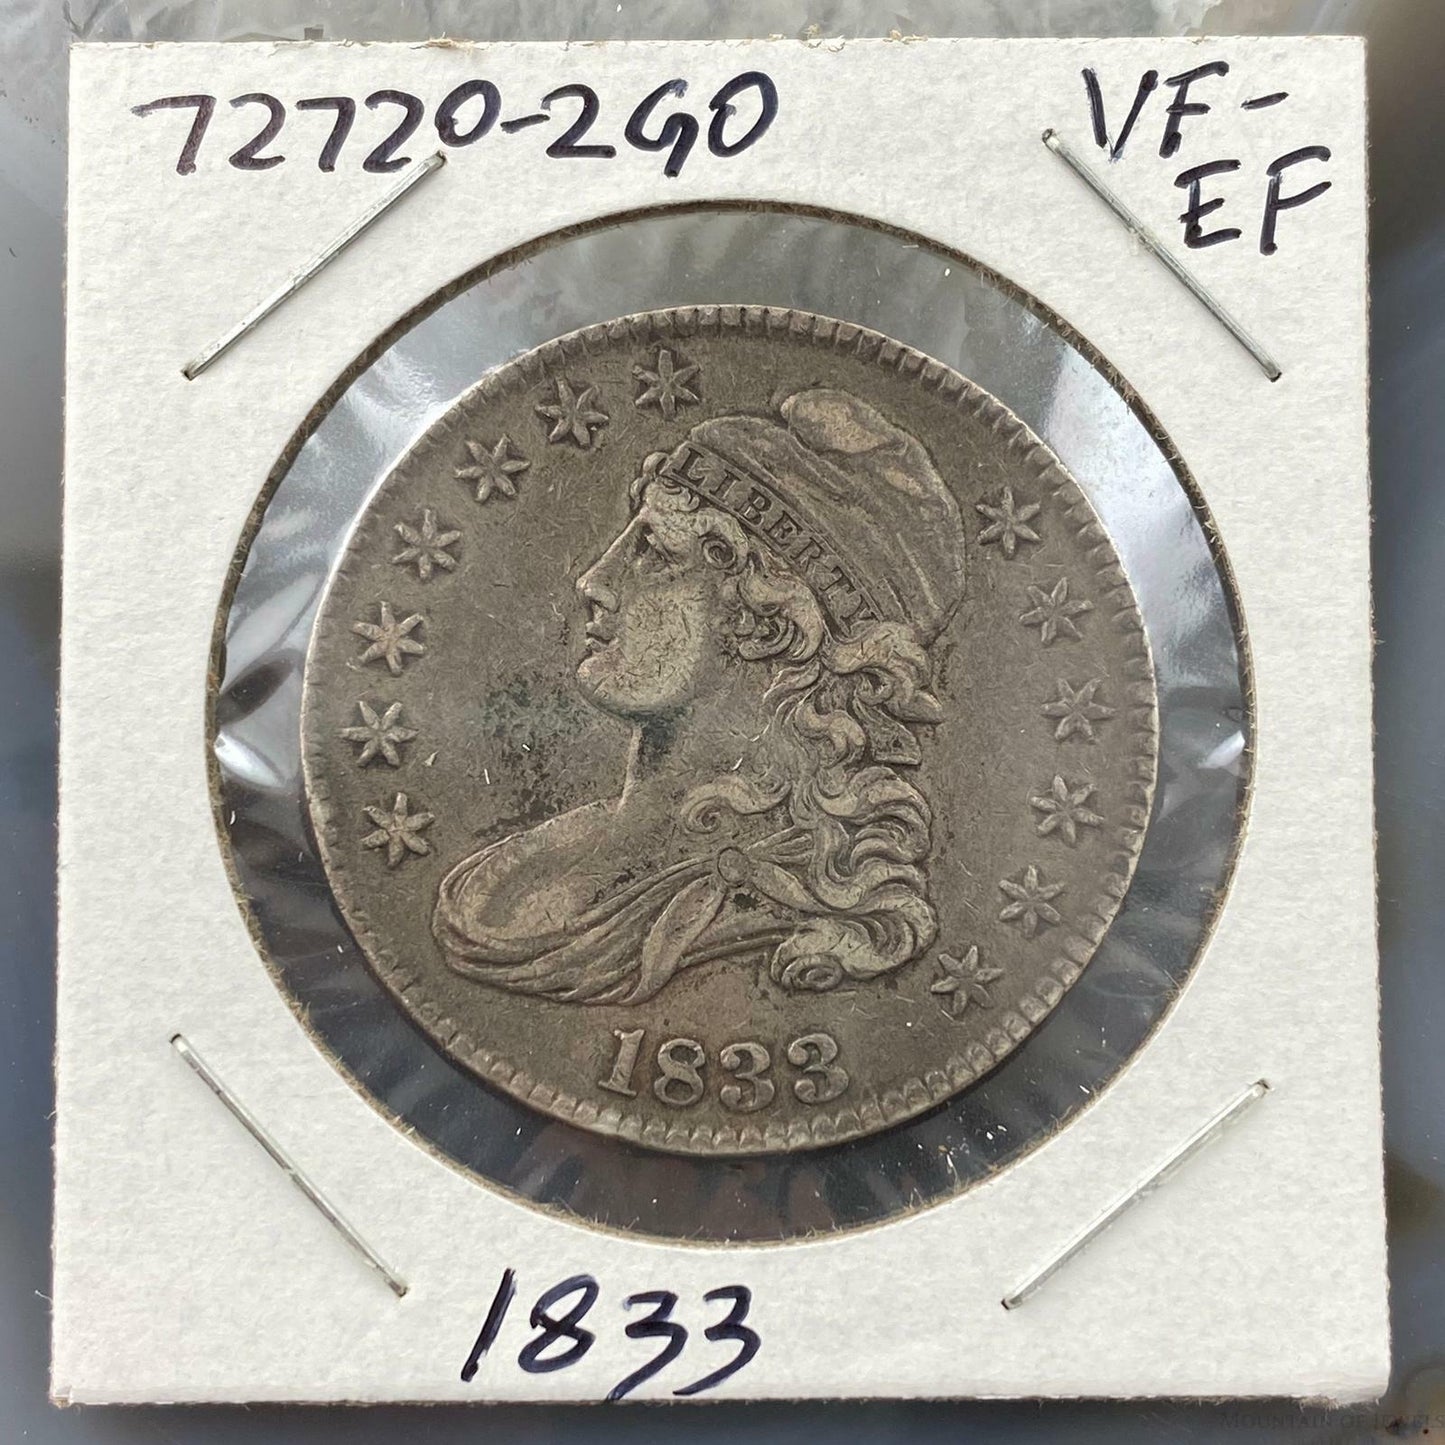 1833 US Capped Bust Half Dollar Early Silver 50c Collectible VF-EF Coin 727202GO